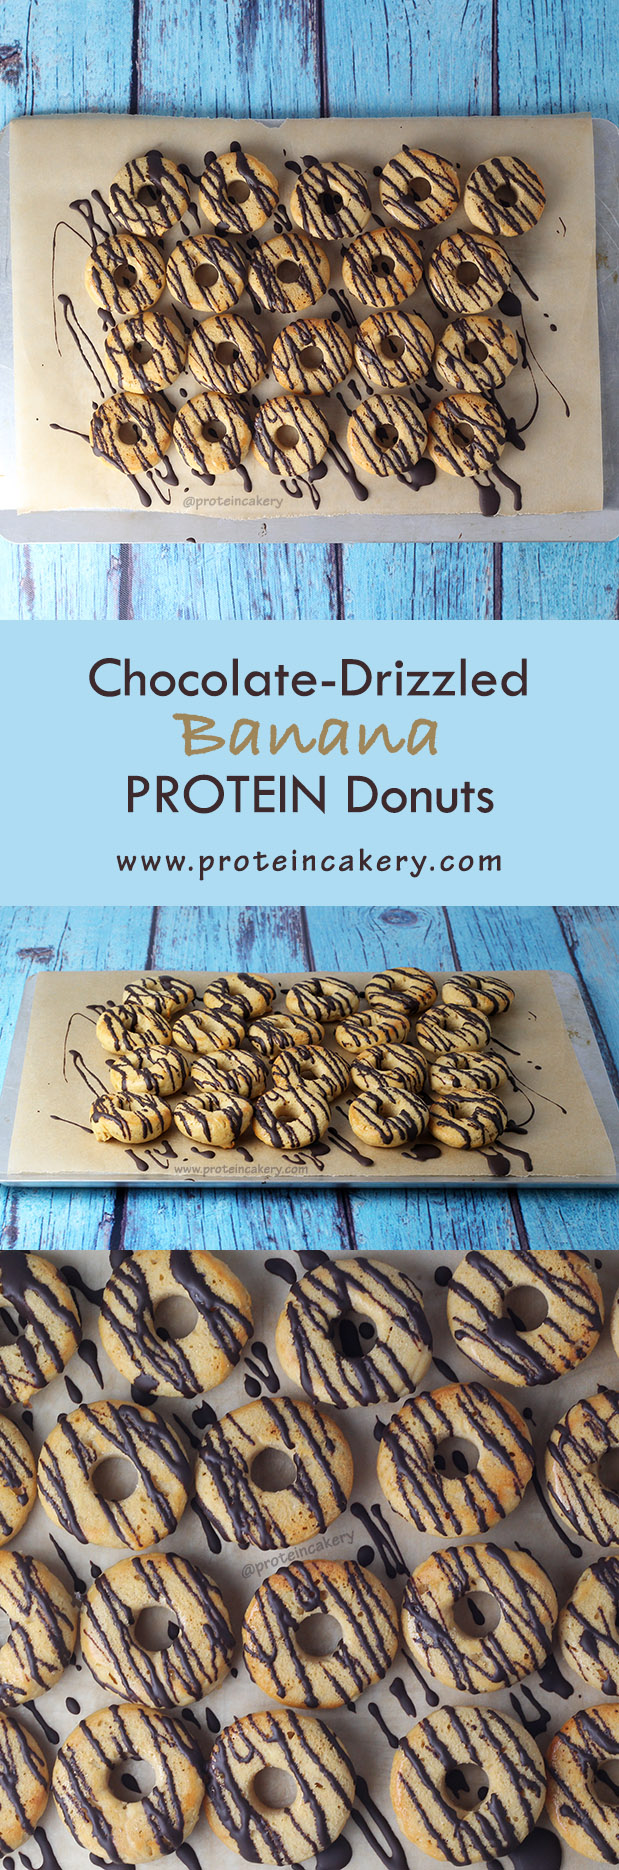 chocolate-drizzled-banana-protein-donuts-protein-cakery-pinterest